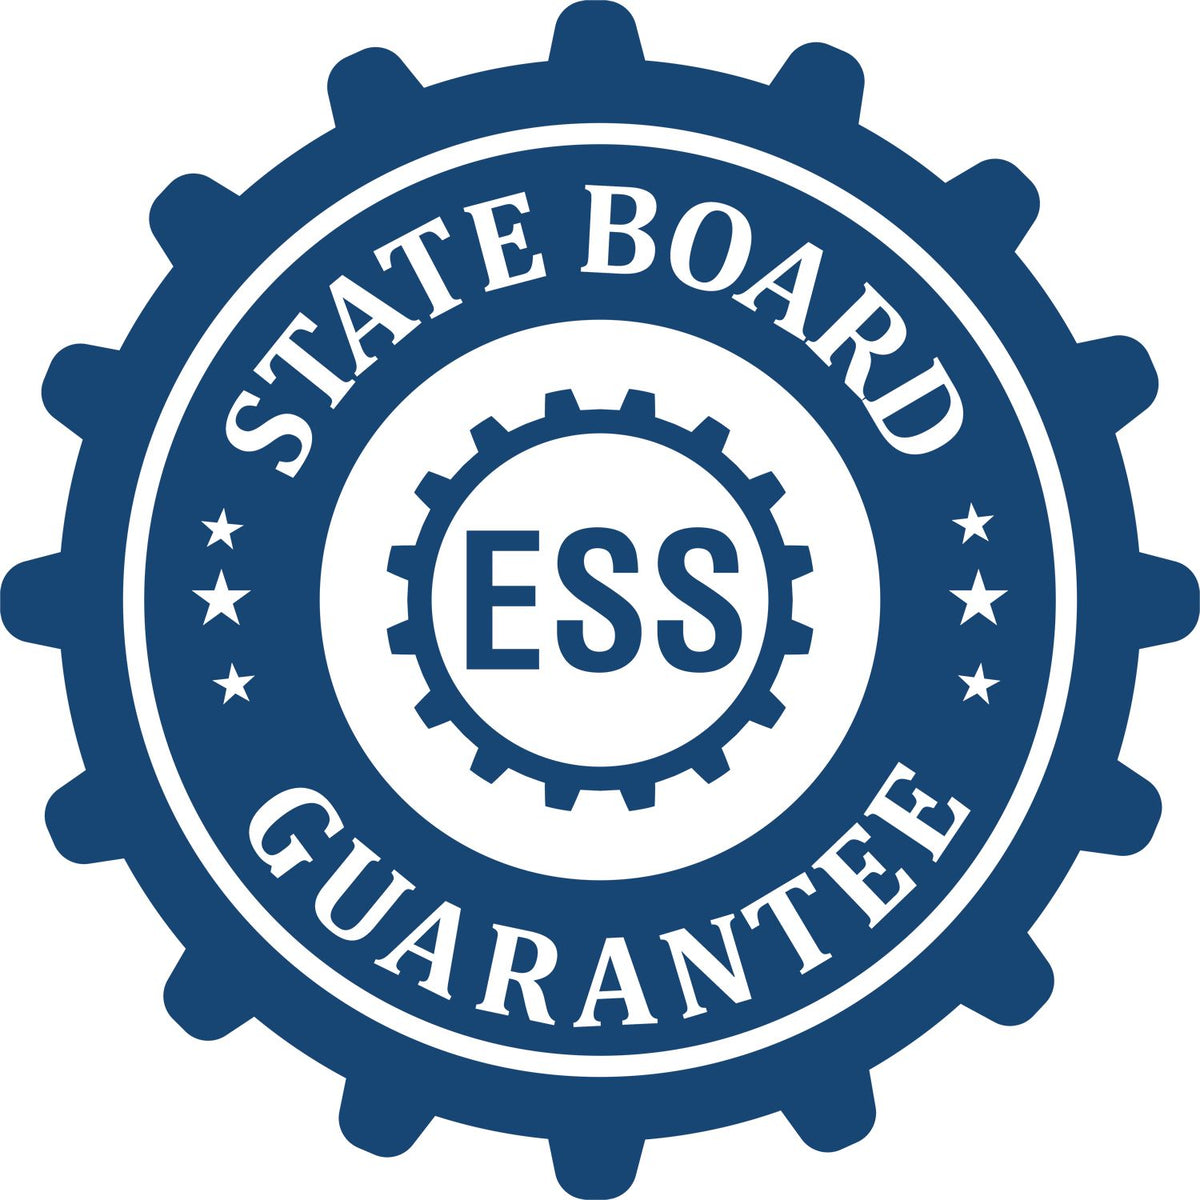 An emblem in a gear shape illustrating a state board guarantee for the Arkansas Professional Engineer Seal Stamp product.